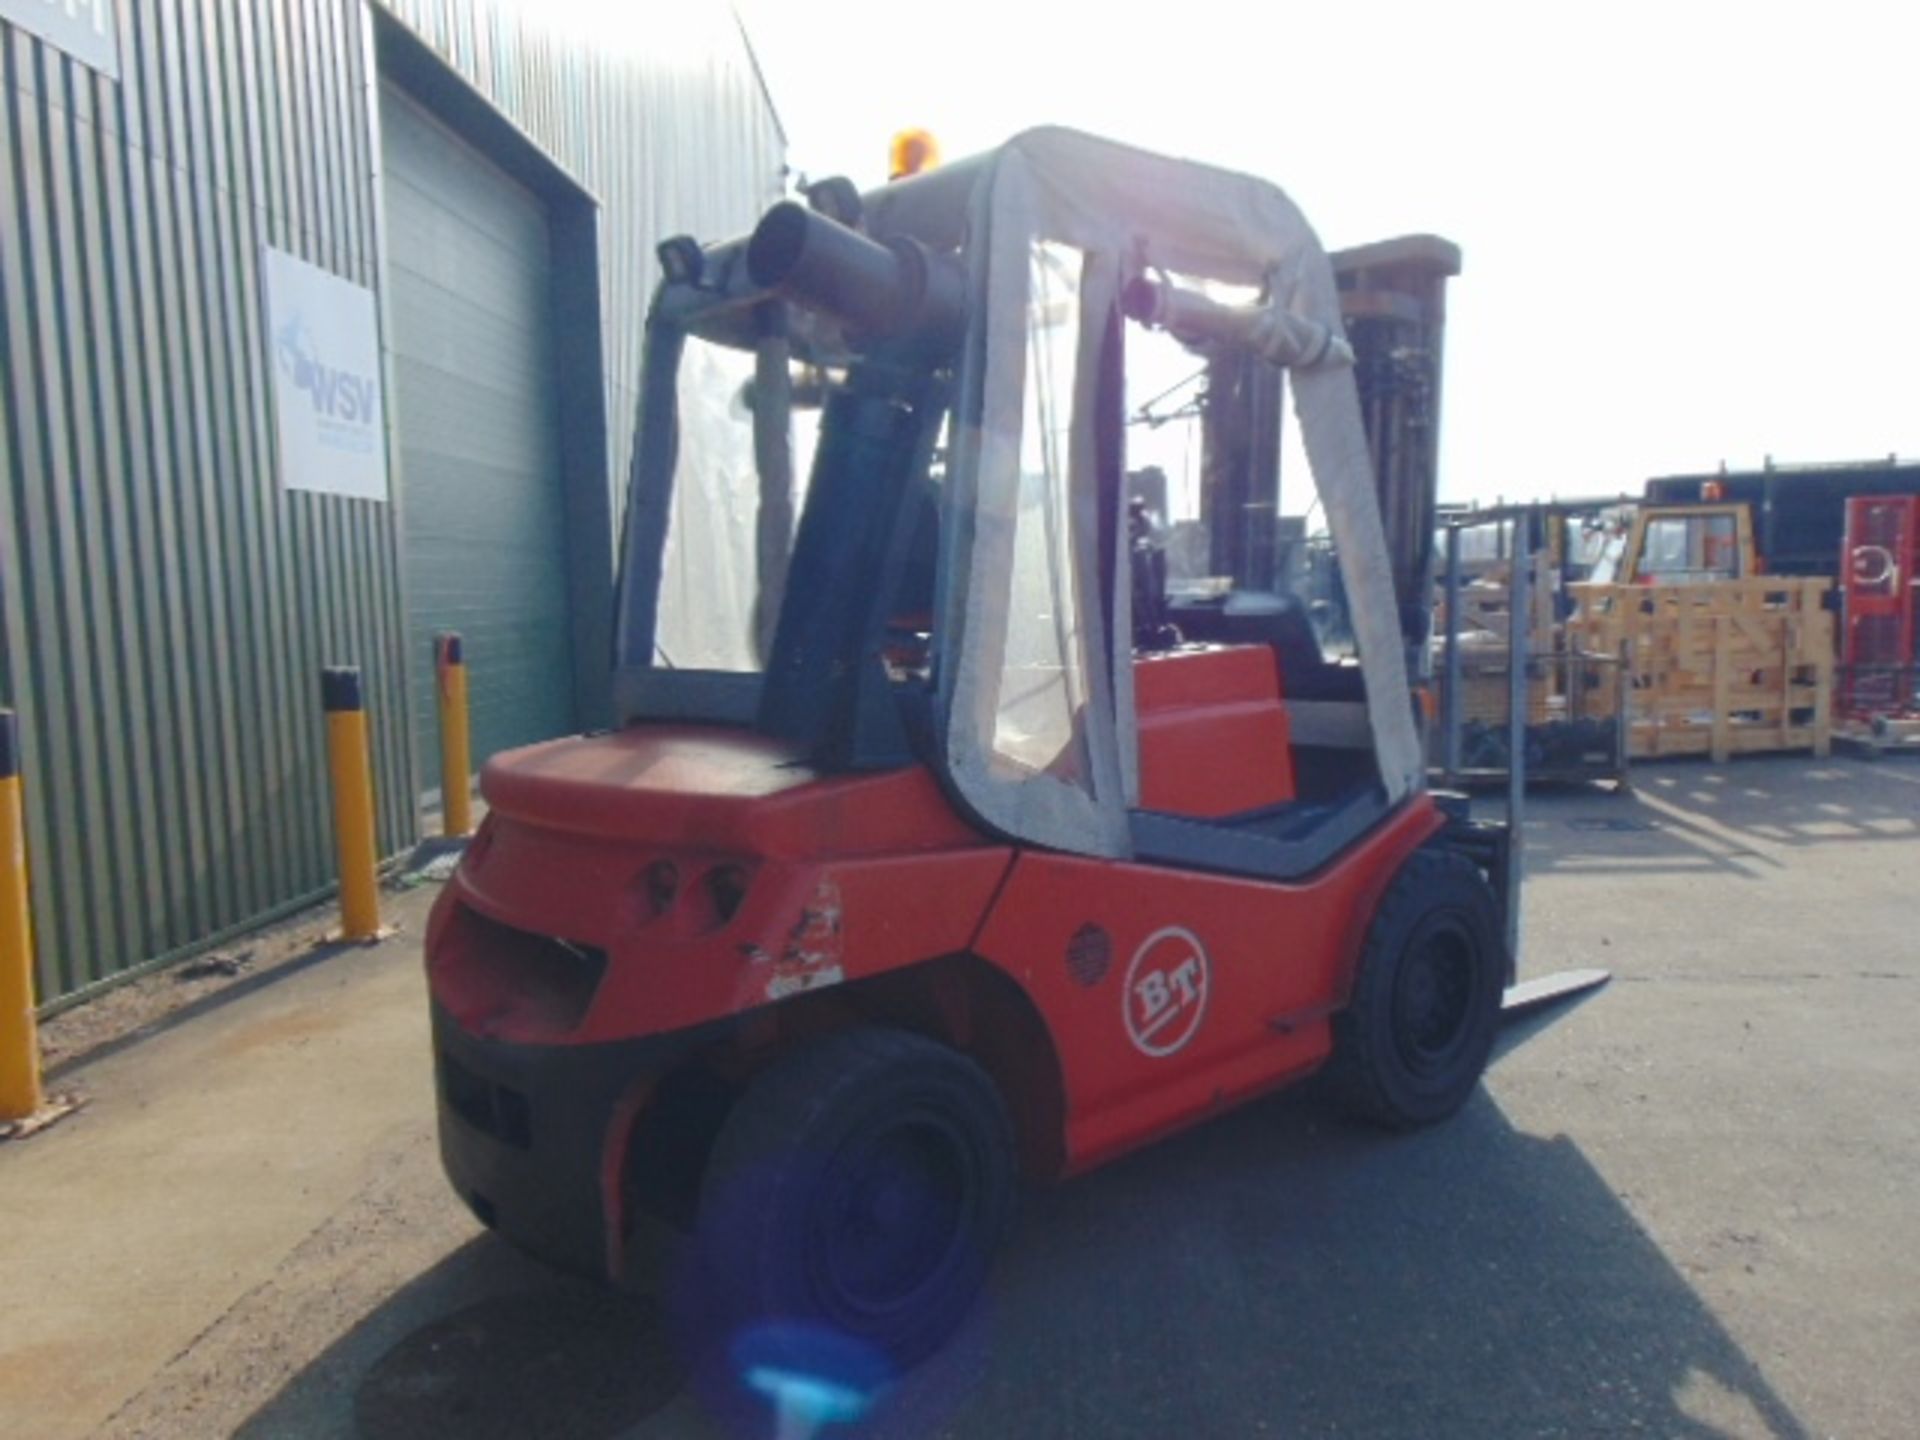 2003 BT Rolatruc 5 Ton Counter Balance Diesel Forklift c/w 3 Stage Mast Side Shift ONLY 1,544 HOURS! - Image 7 of 25